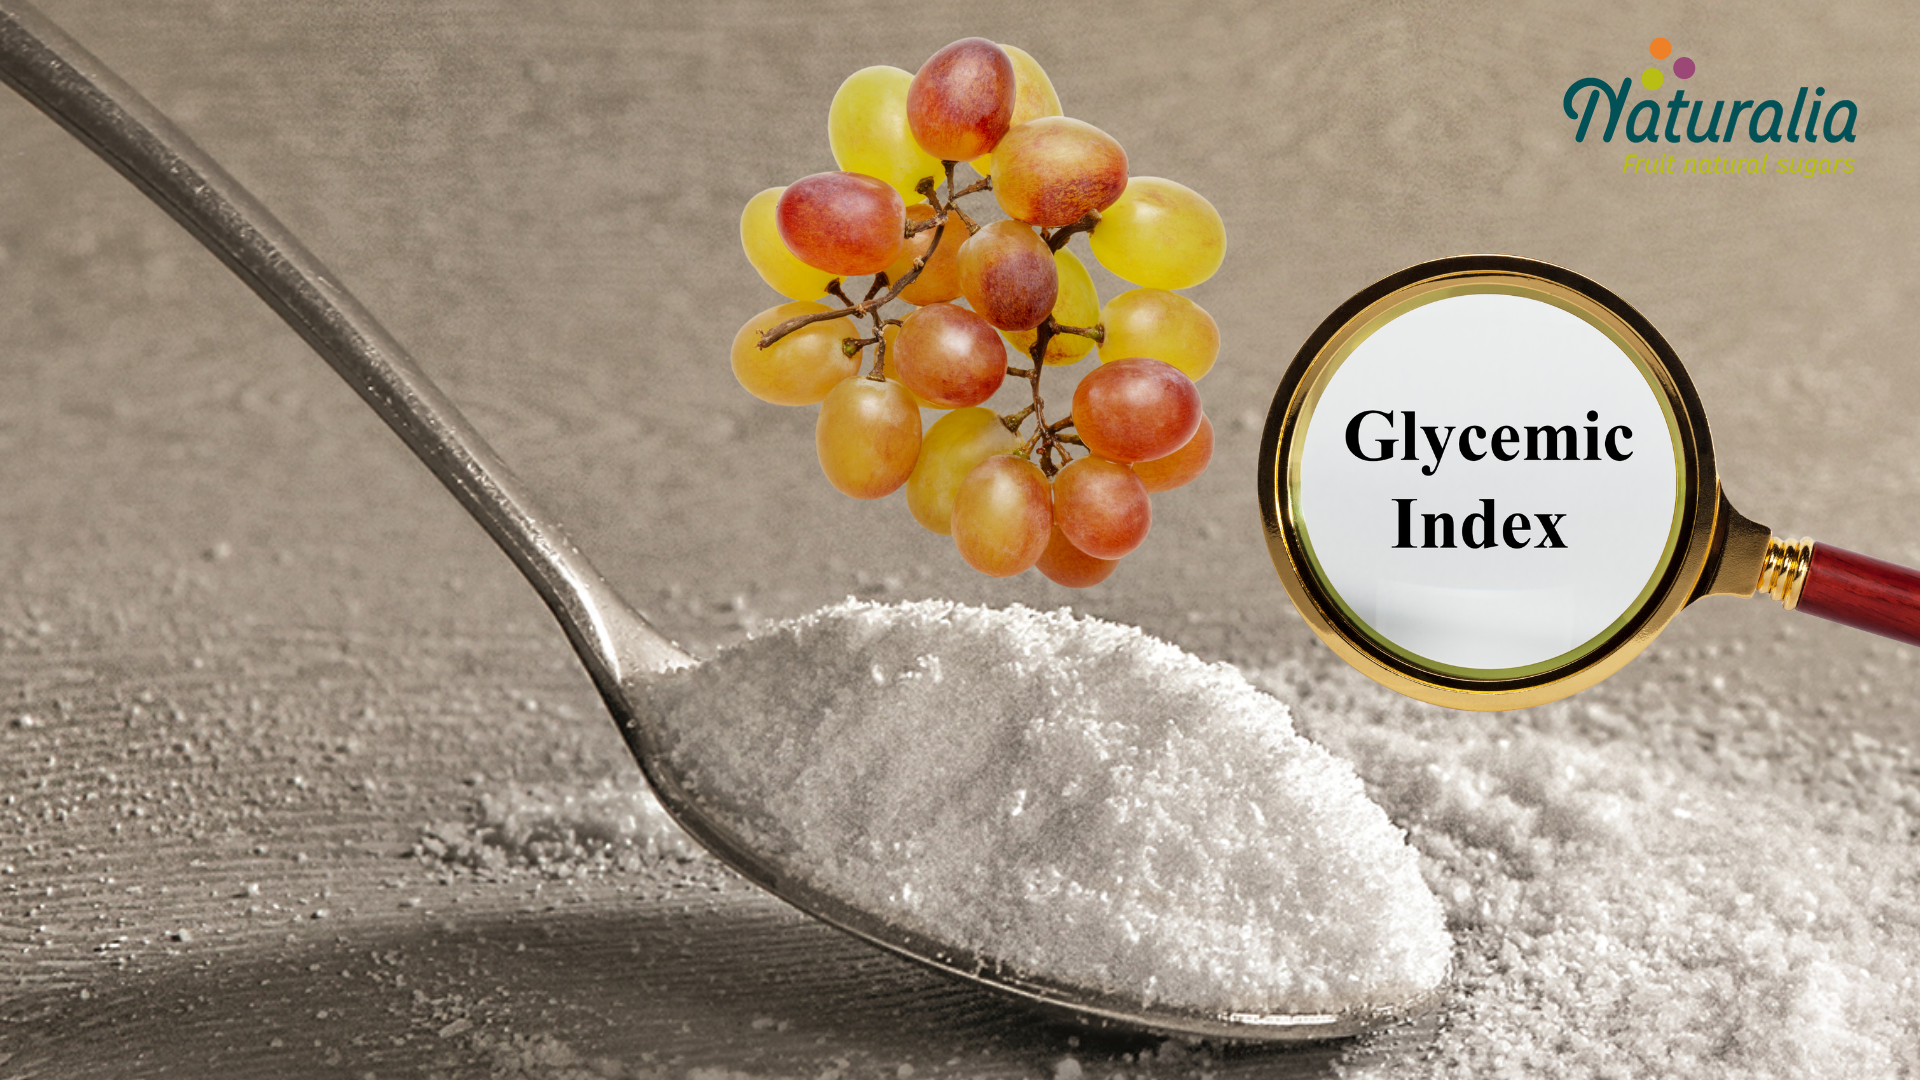 Study of the glycemic response of chrystalline grape sugars in comparison with other commercial sugars